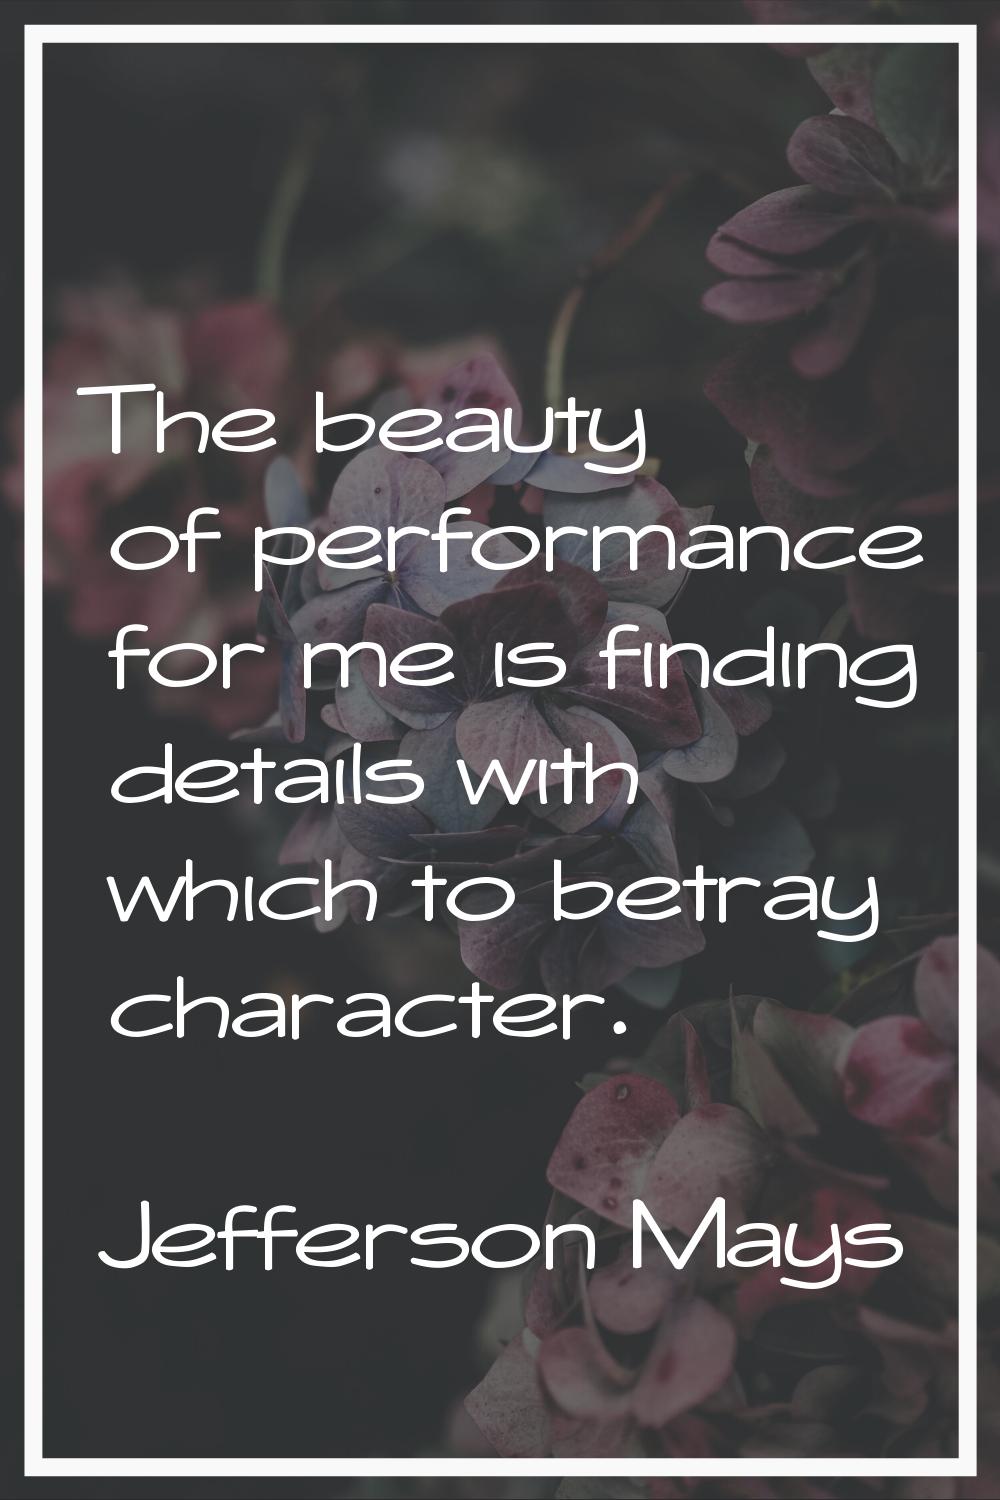 The beauty of performance for me is finding details with which to betray character.